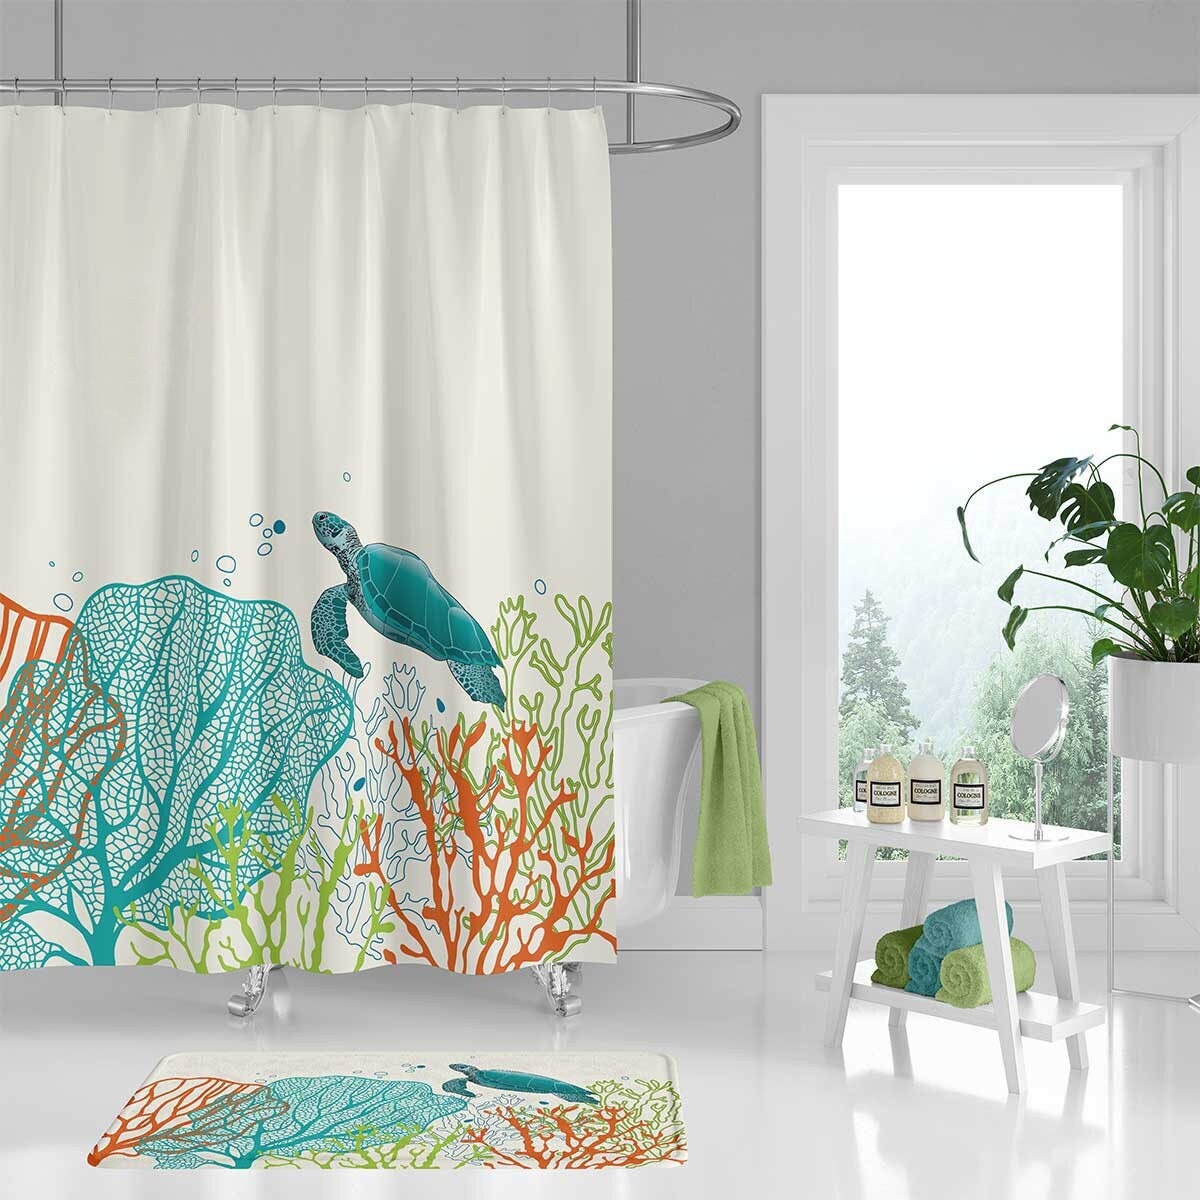 Ocean Shower Curtain,cartoon Under Sea Animal Whales Fishes And Coral Reefs  Cute Design For Kids Room Decor, Hooks Included, 72x72